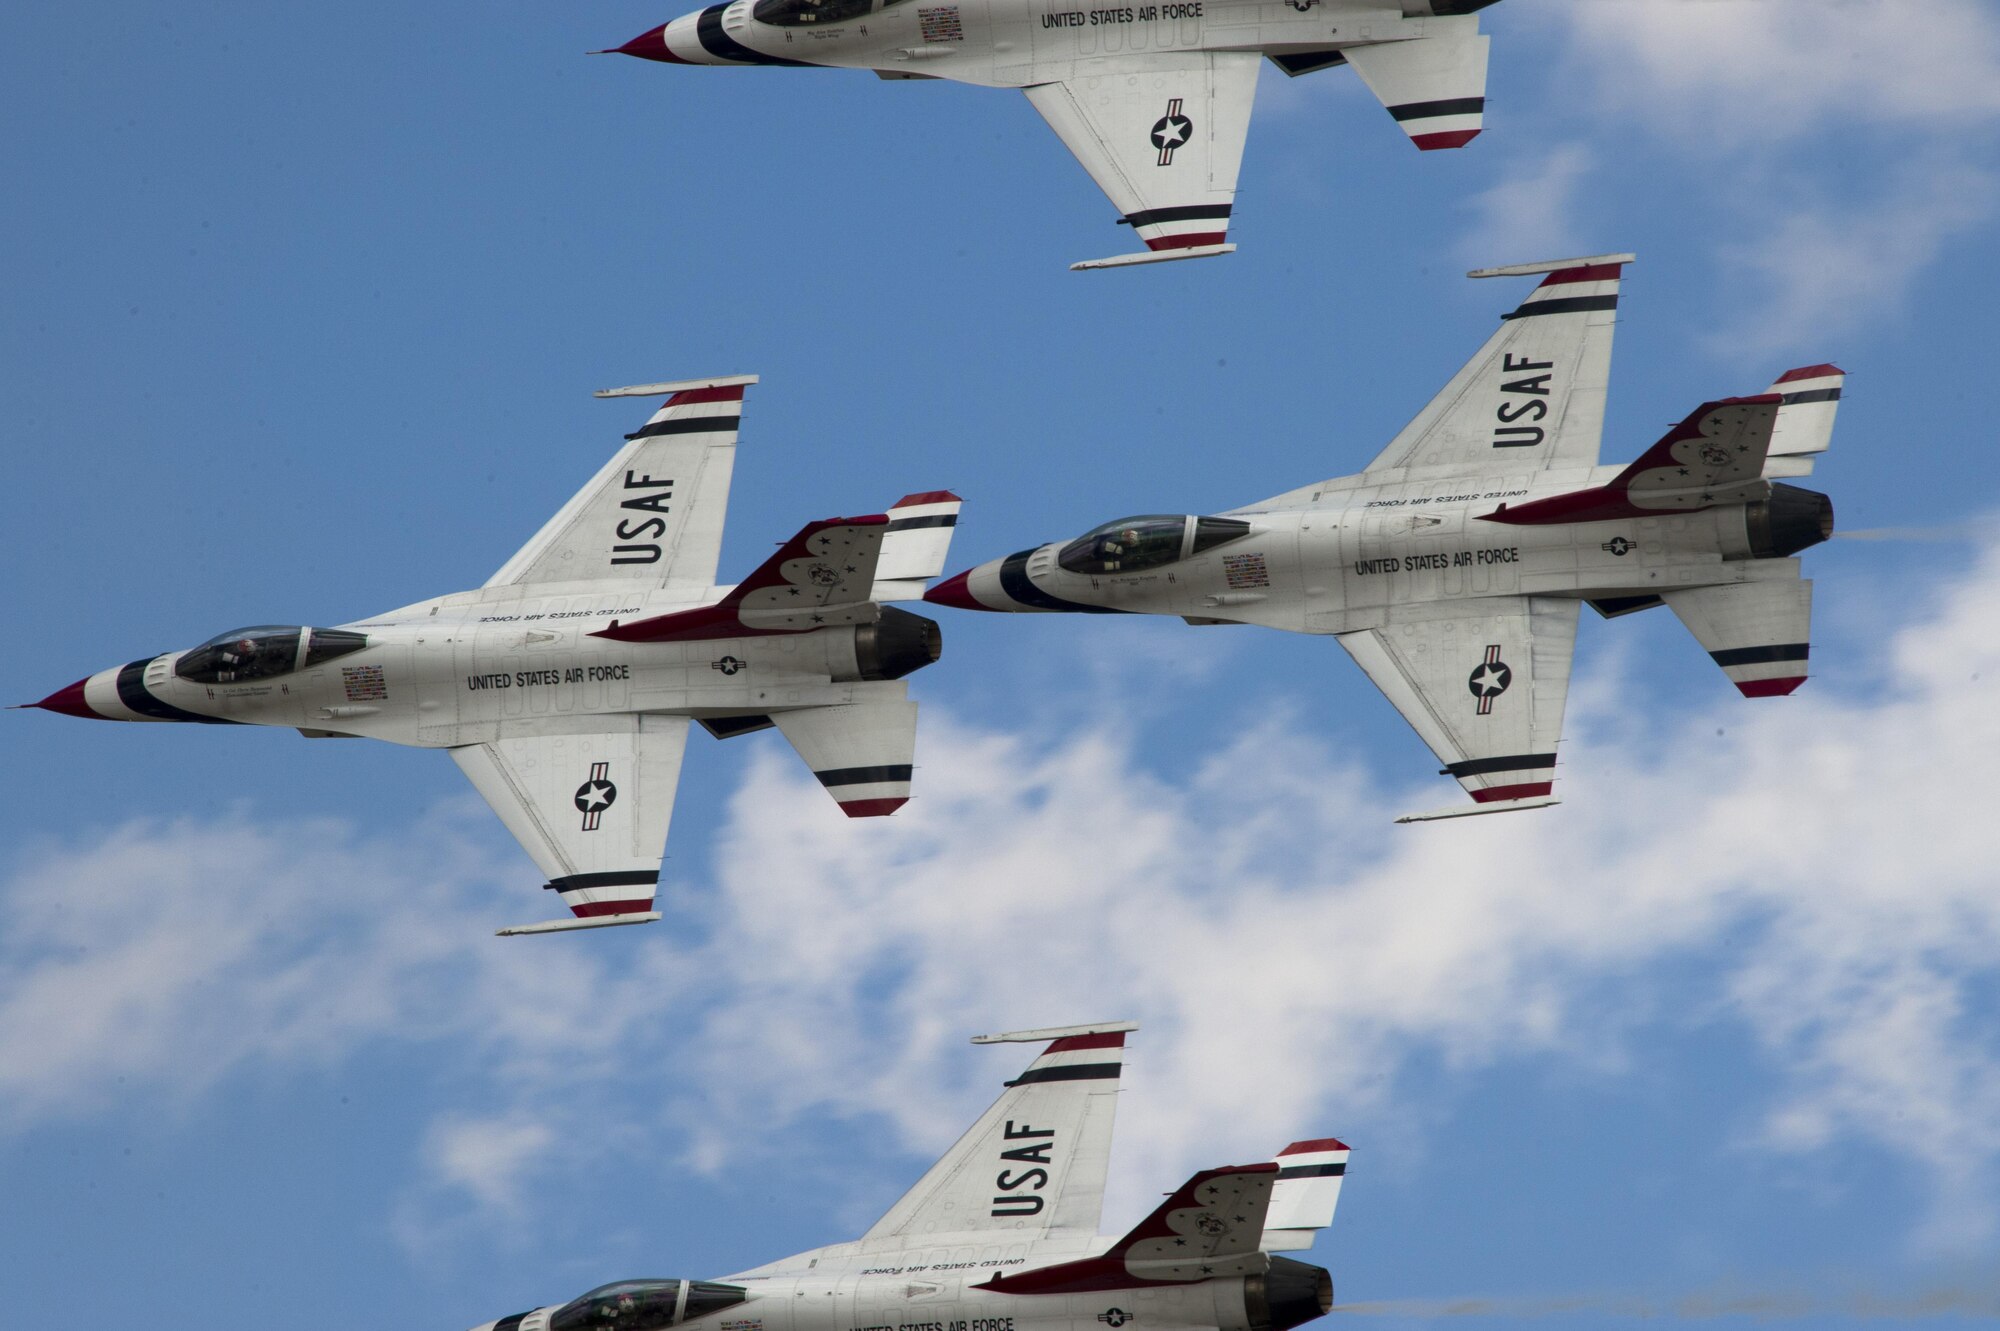 The U.S. Air Force Thunderbirds perform an aerial demonstration during the Cannon Air Show, May 28, 2016, at Cannon Air Force Base, N.M. The 2016 Cannon Air Show highlights the unique capabilities and qualities of Cannon’s Air commandos and also celebrates the long-standing relationship between the 27th Special Operations Wing and the High Plains community. (U.S. Air Force photo/Tech. Sgt. Manuel Martinez)